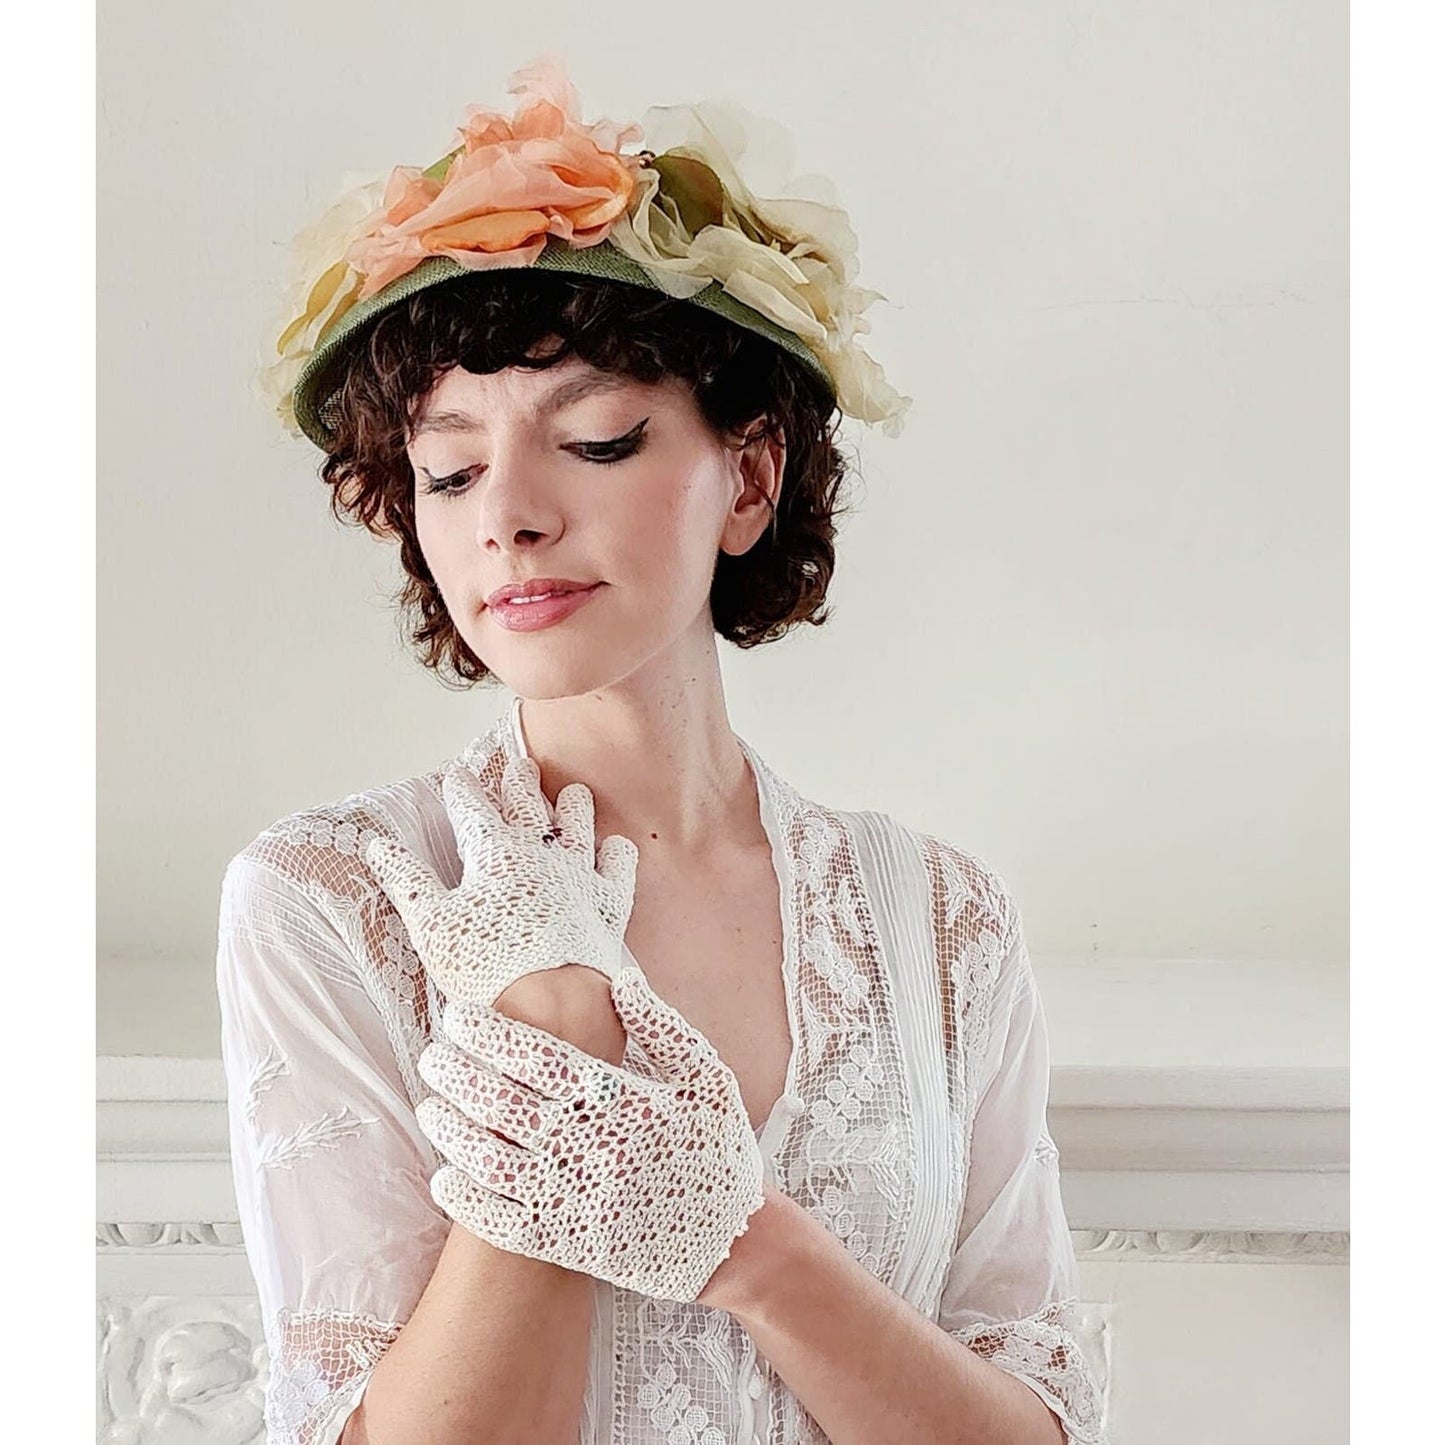 Vintage Ladies Gloves in Ivory Crochet Lace Stretchy